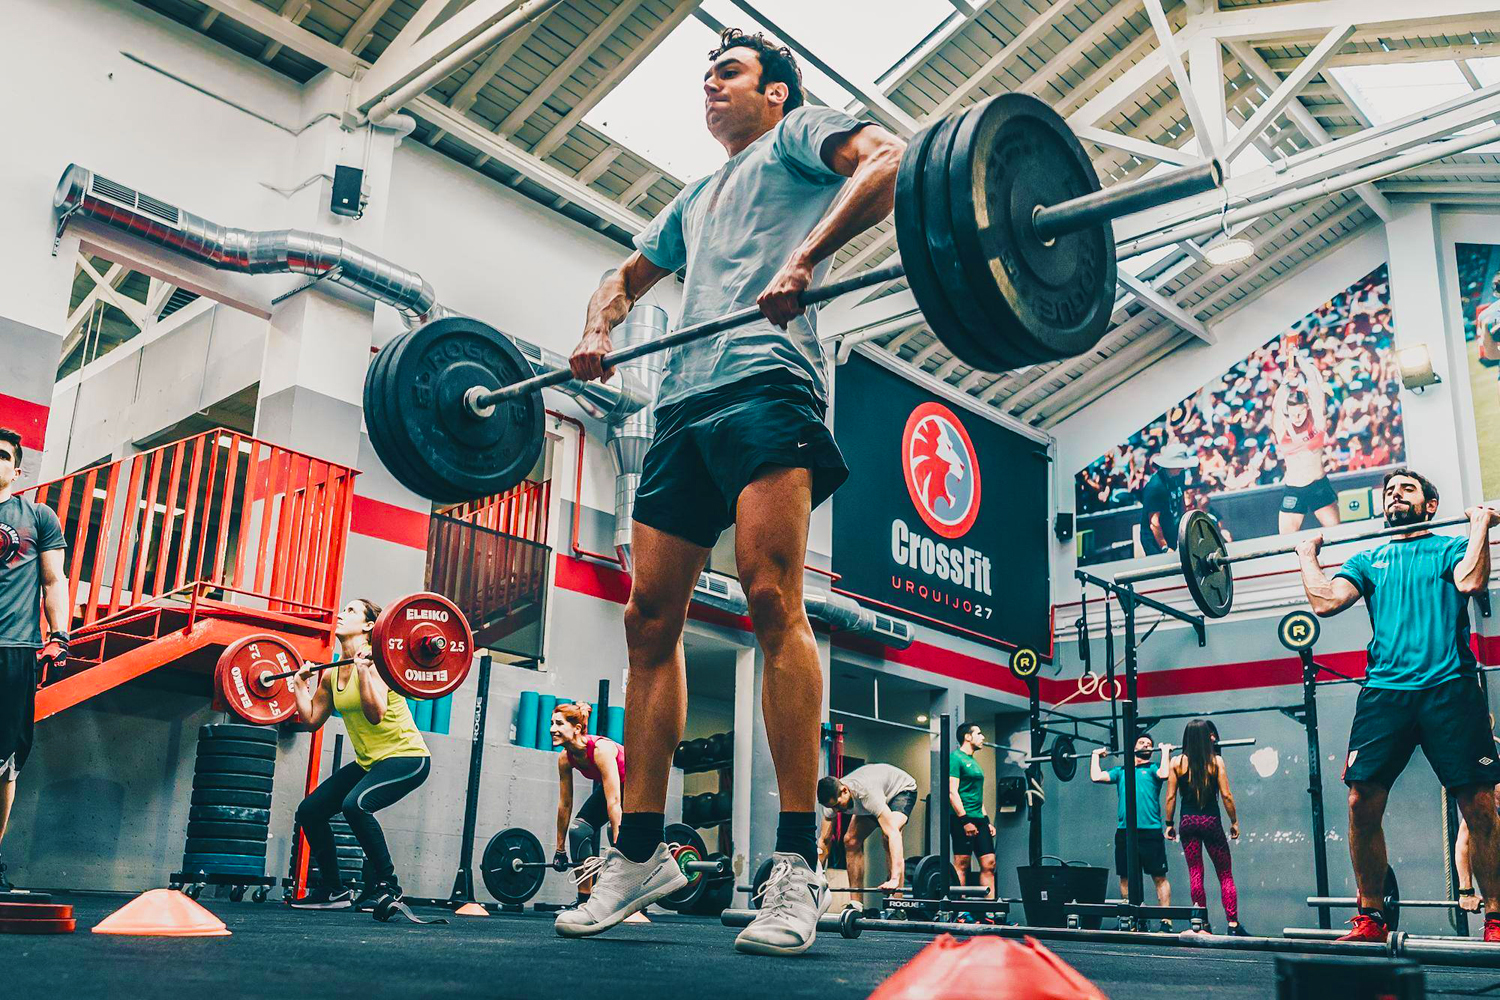 New to CrossFit? Check out our beginner's guide to CrossFit and